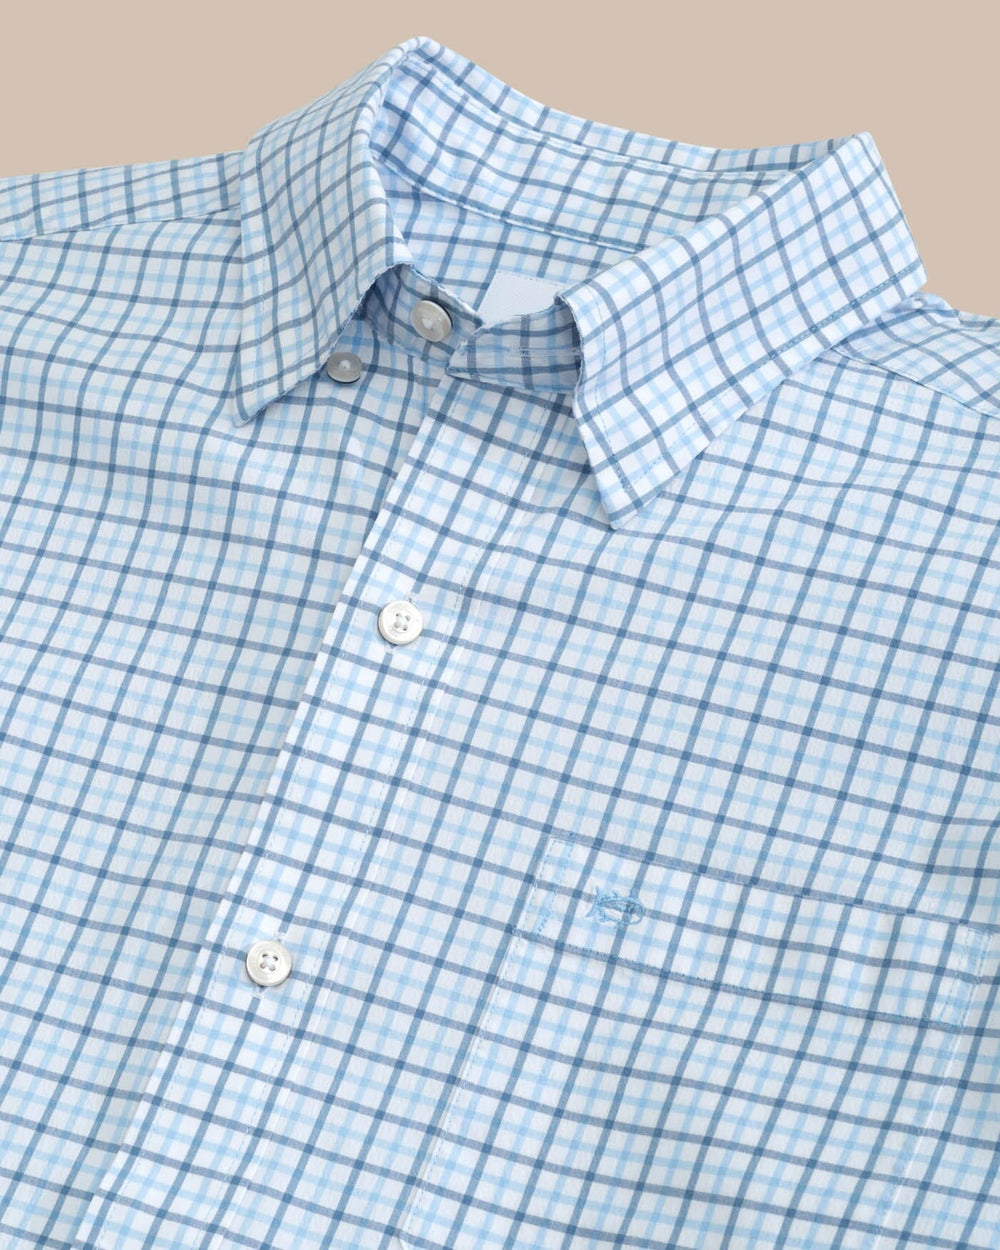 The detail view of the Southern Tide Charleston Larkin Check Long Sleeve Sport Shirt by Southern Tide - Clearwater Blue